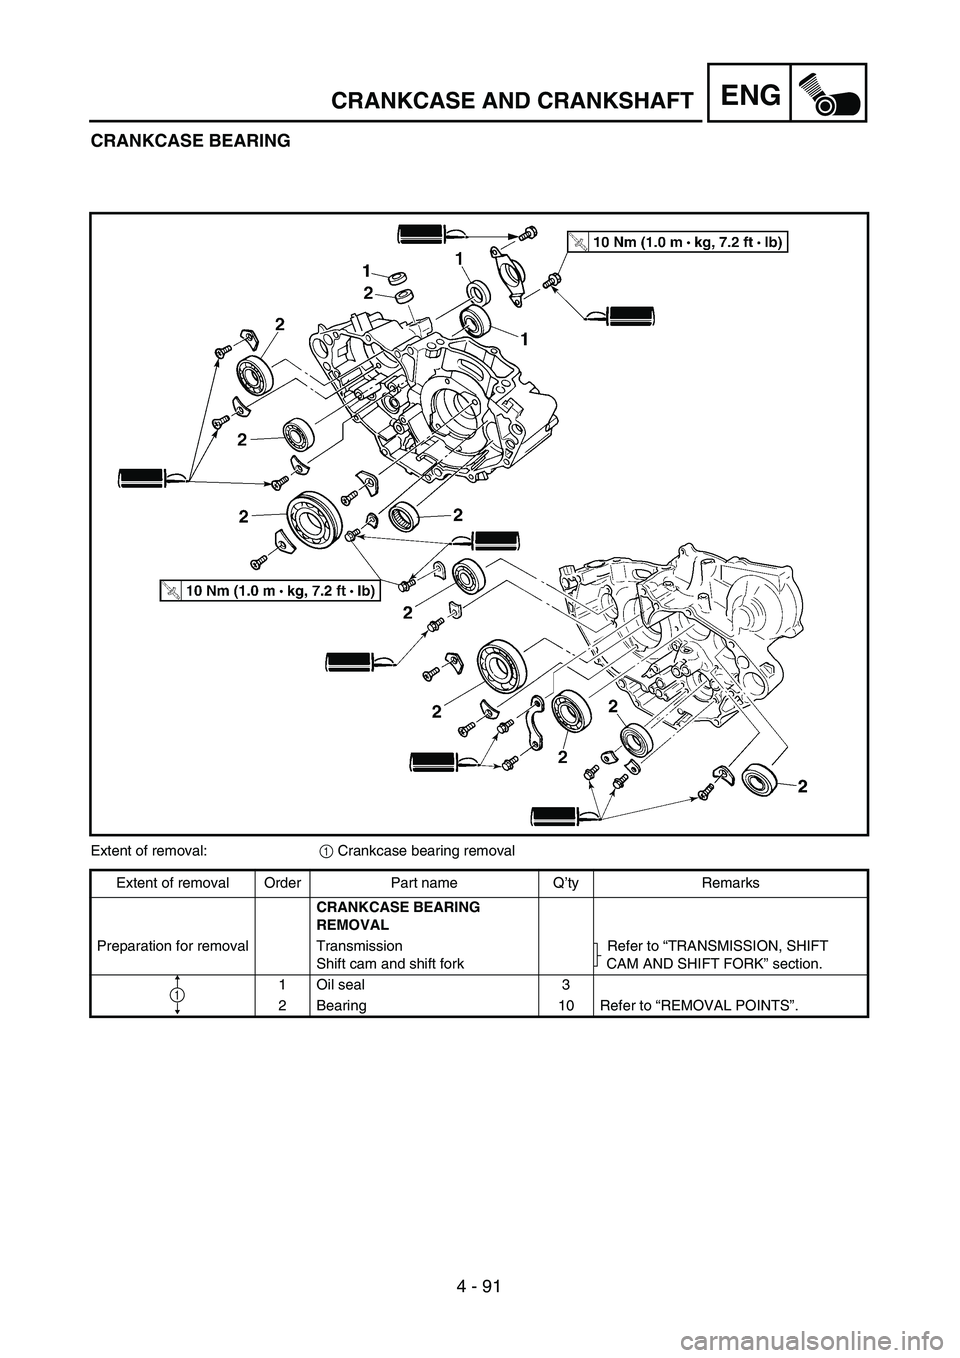 YAMAHA WR 450F 2004  Owners Manual 4 - 91
ENGCRANKCASE AND CRANKSHAFT
CRANKCASE BEARING
Extent of removal:1 Crankcase bearing removal
Extent of removal Order Part name Q’ty Remarks
CRANKCASE BEARING 
REMOVAL
Preparation for removal T